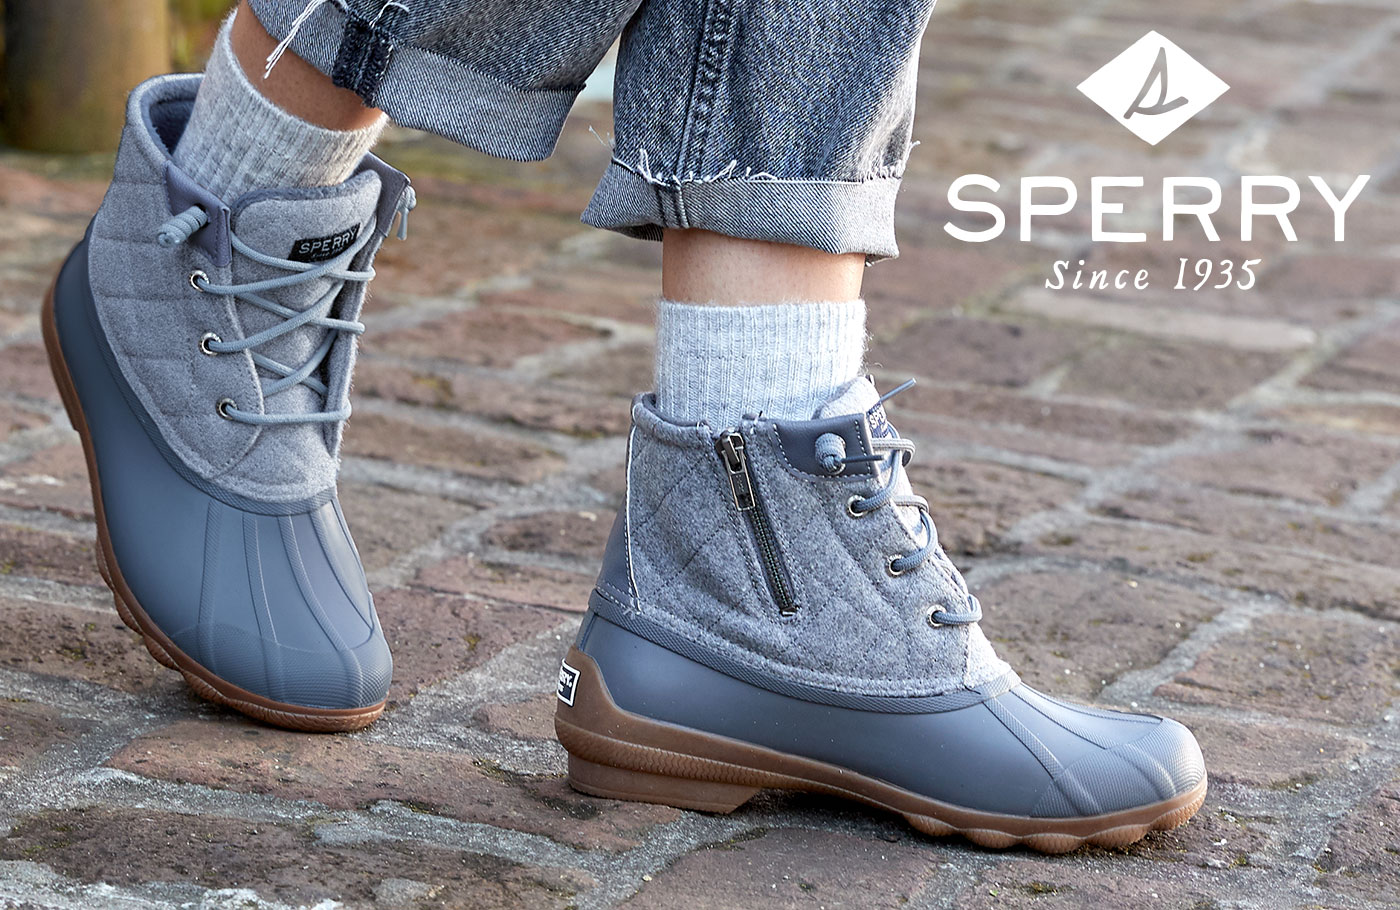 pair of grey wool top sperry duck boots